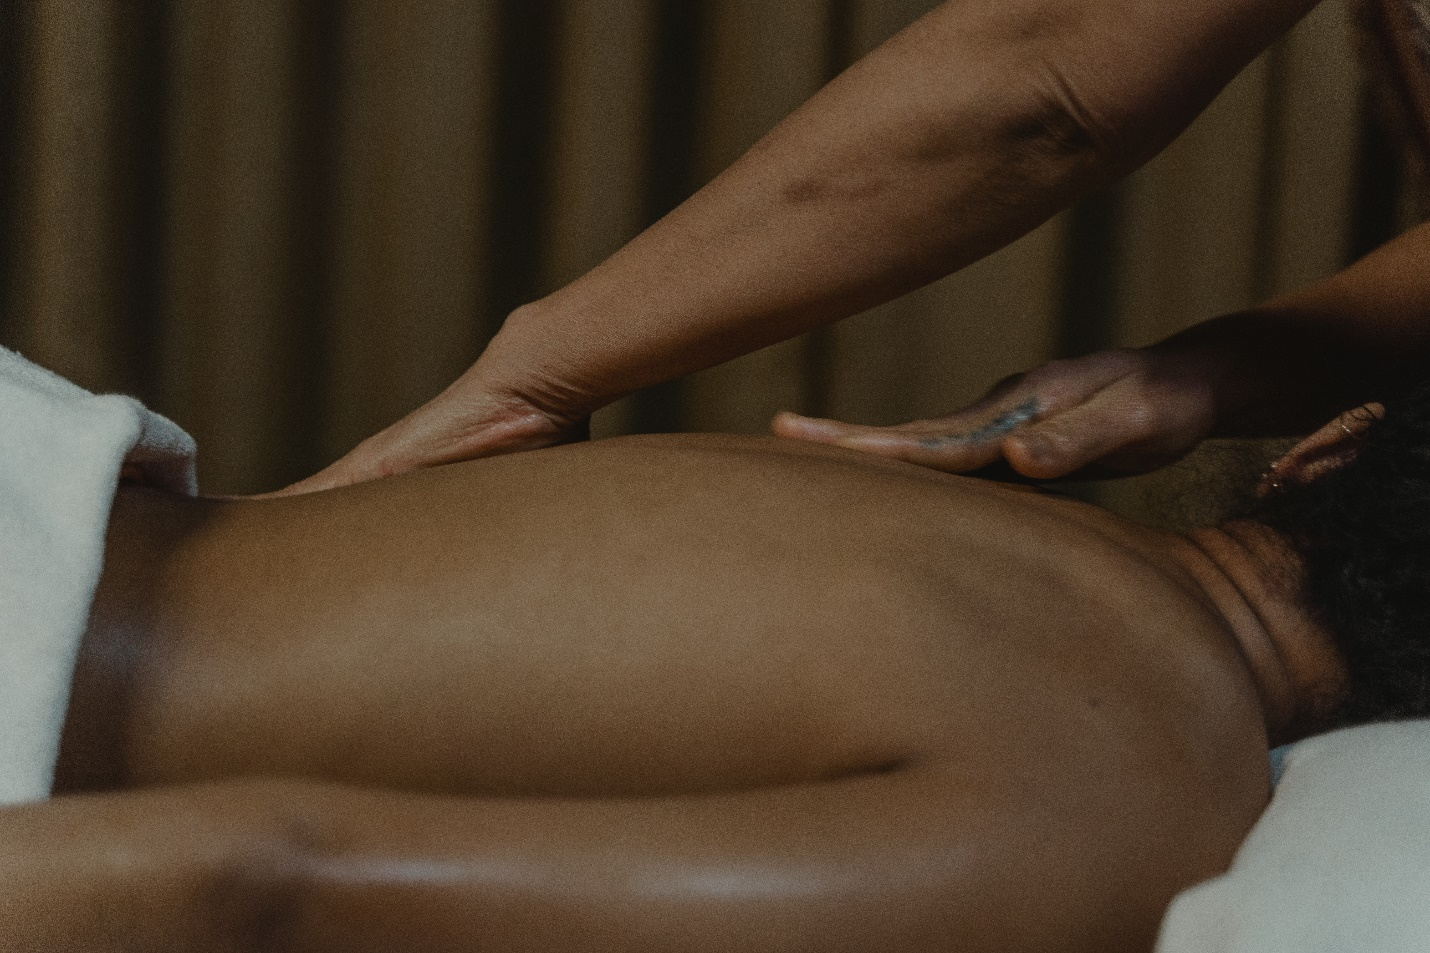 A person getting a back massage for lower back pain